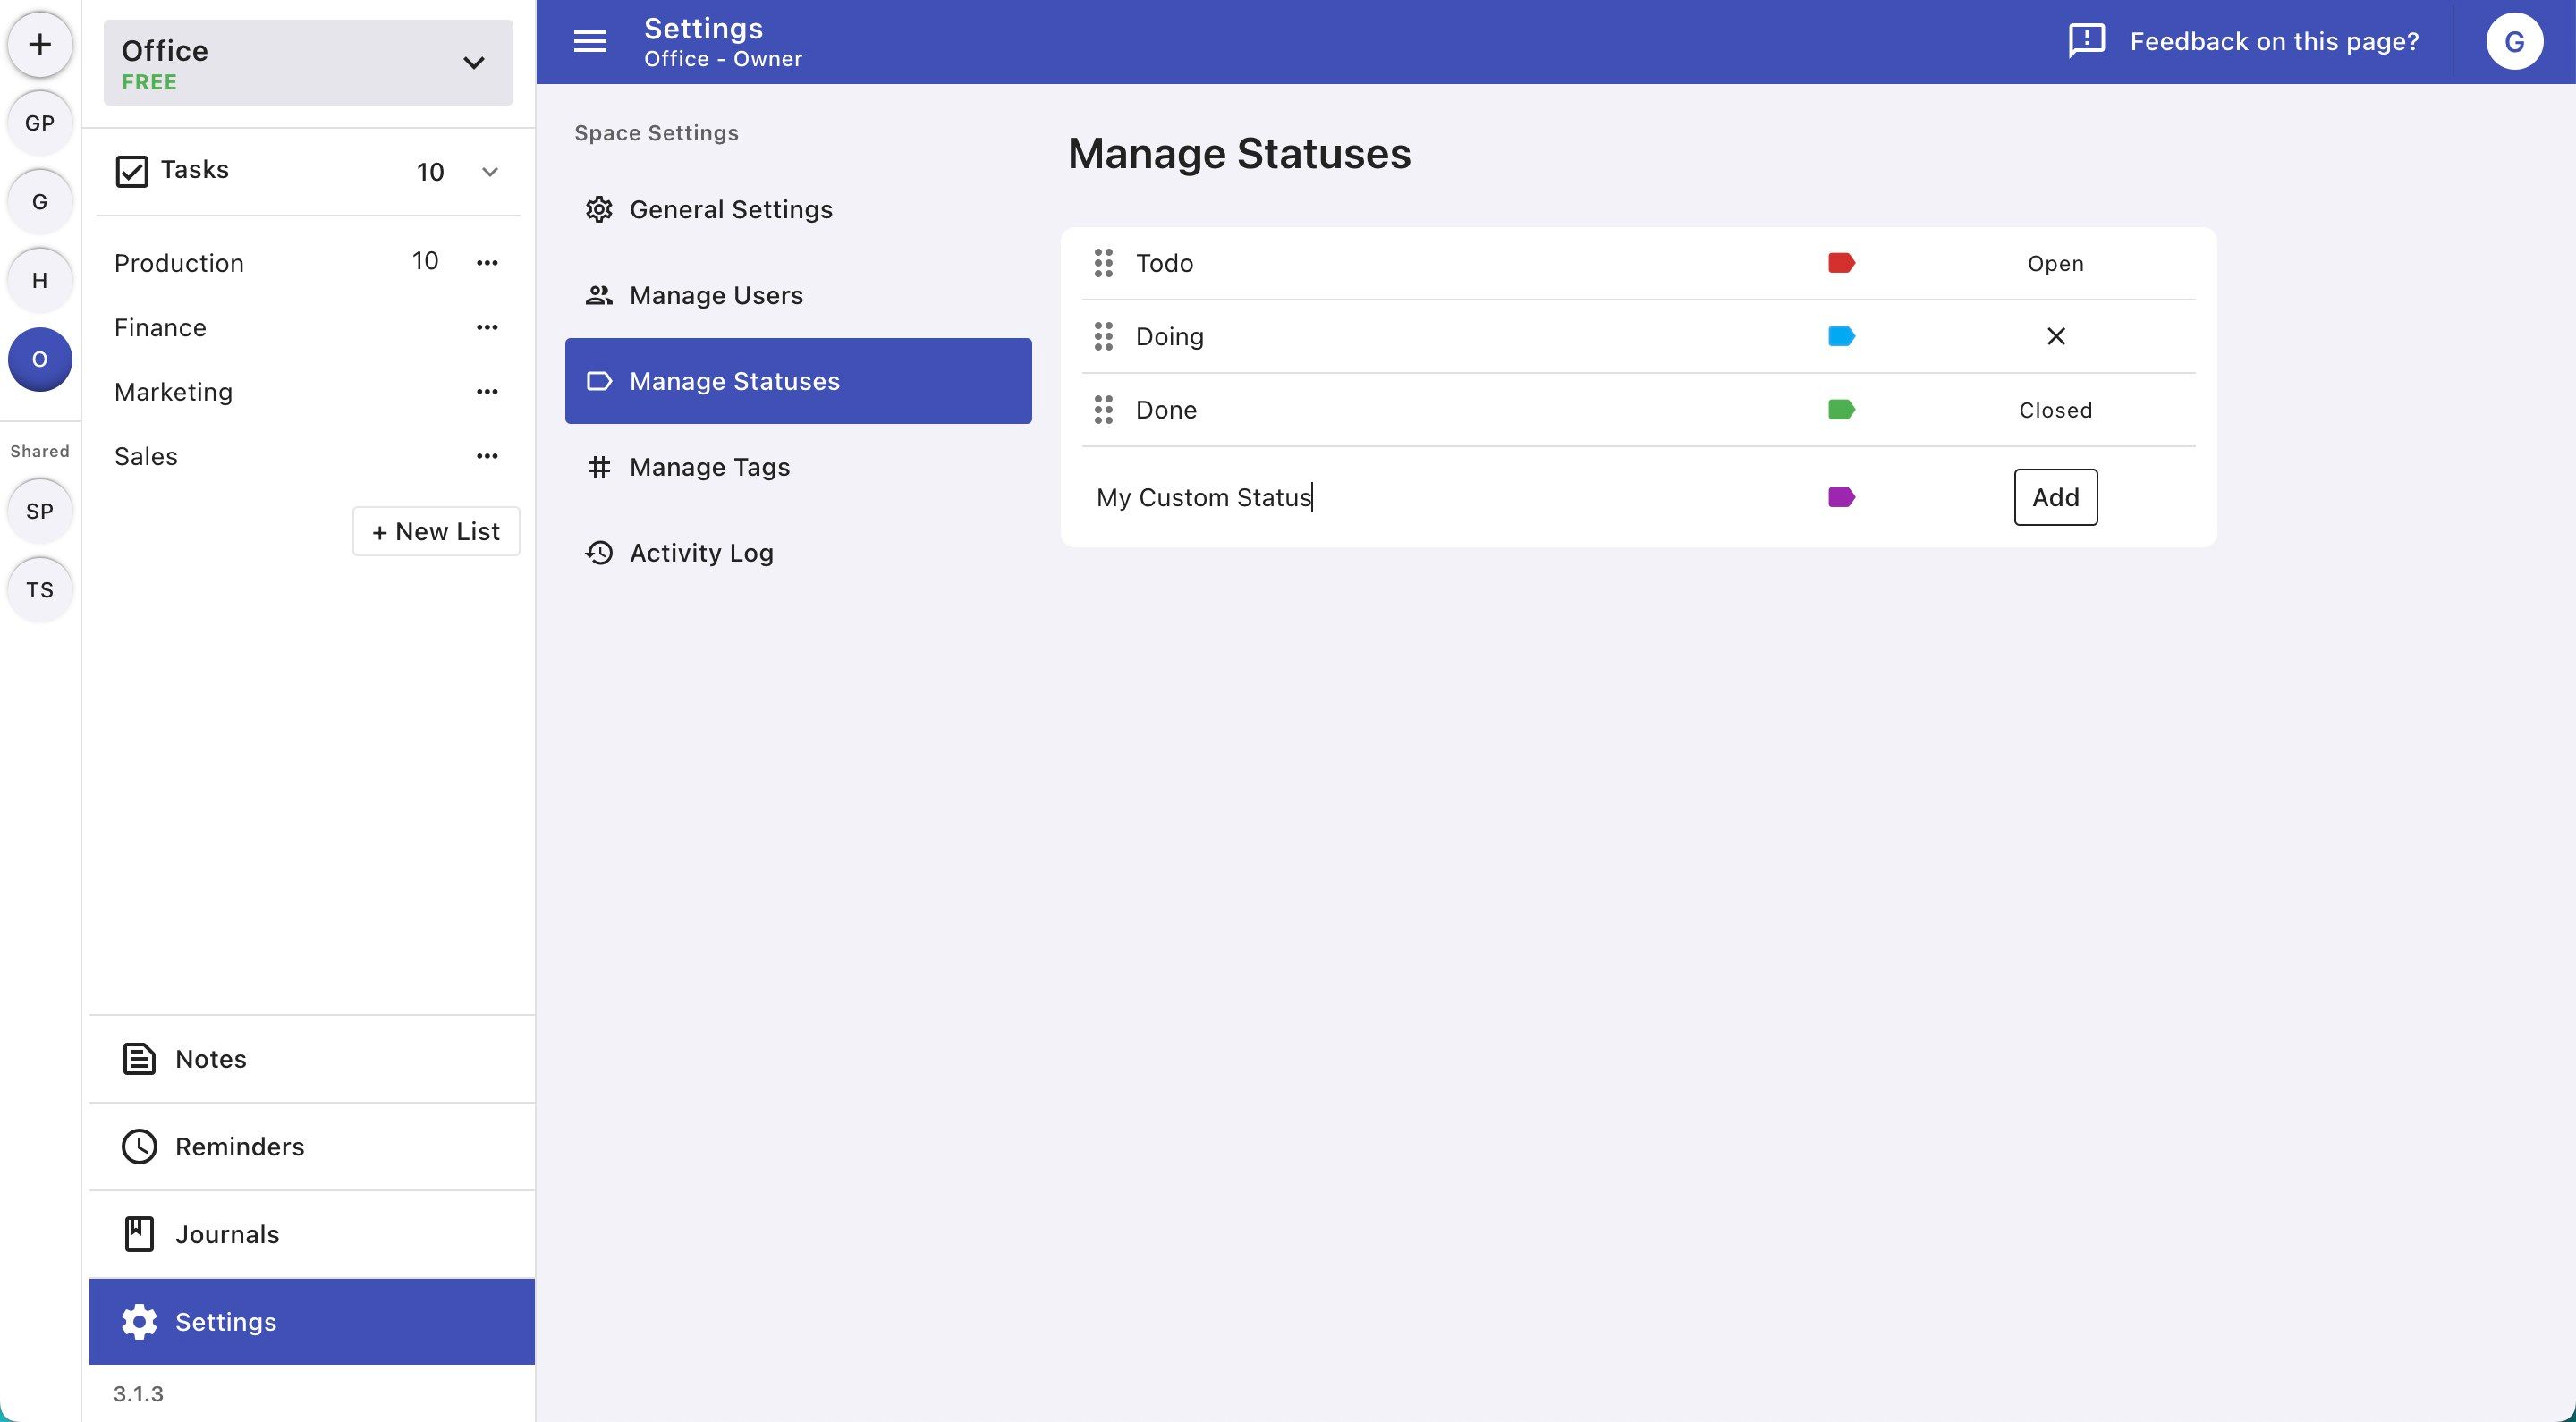 Create and manage custom Task statuses for each space based on your use case.